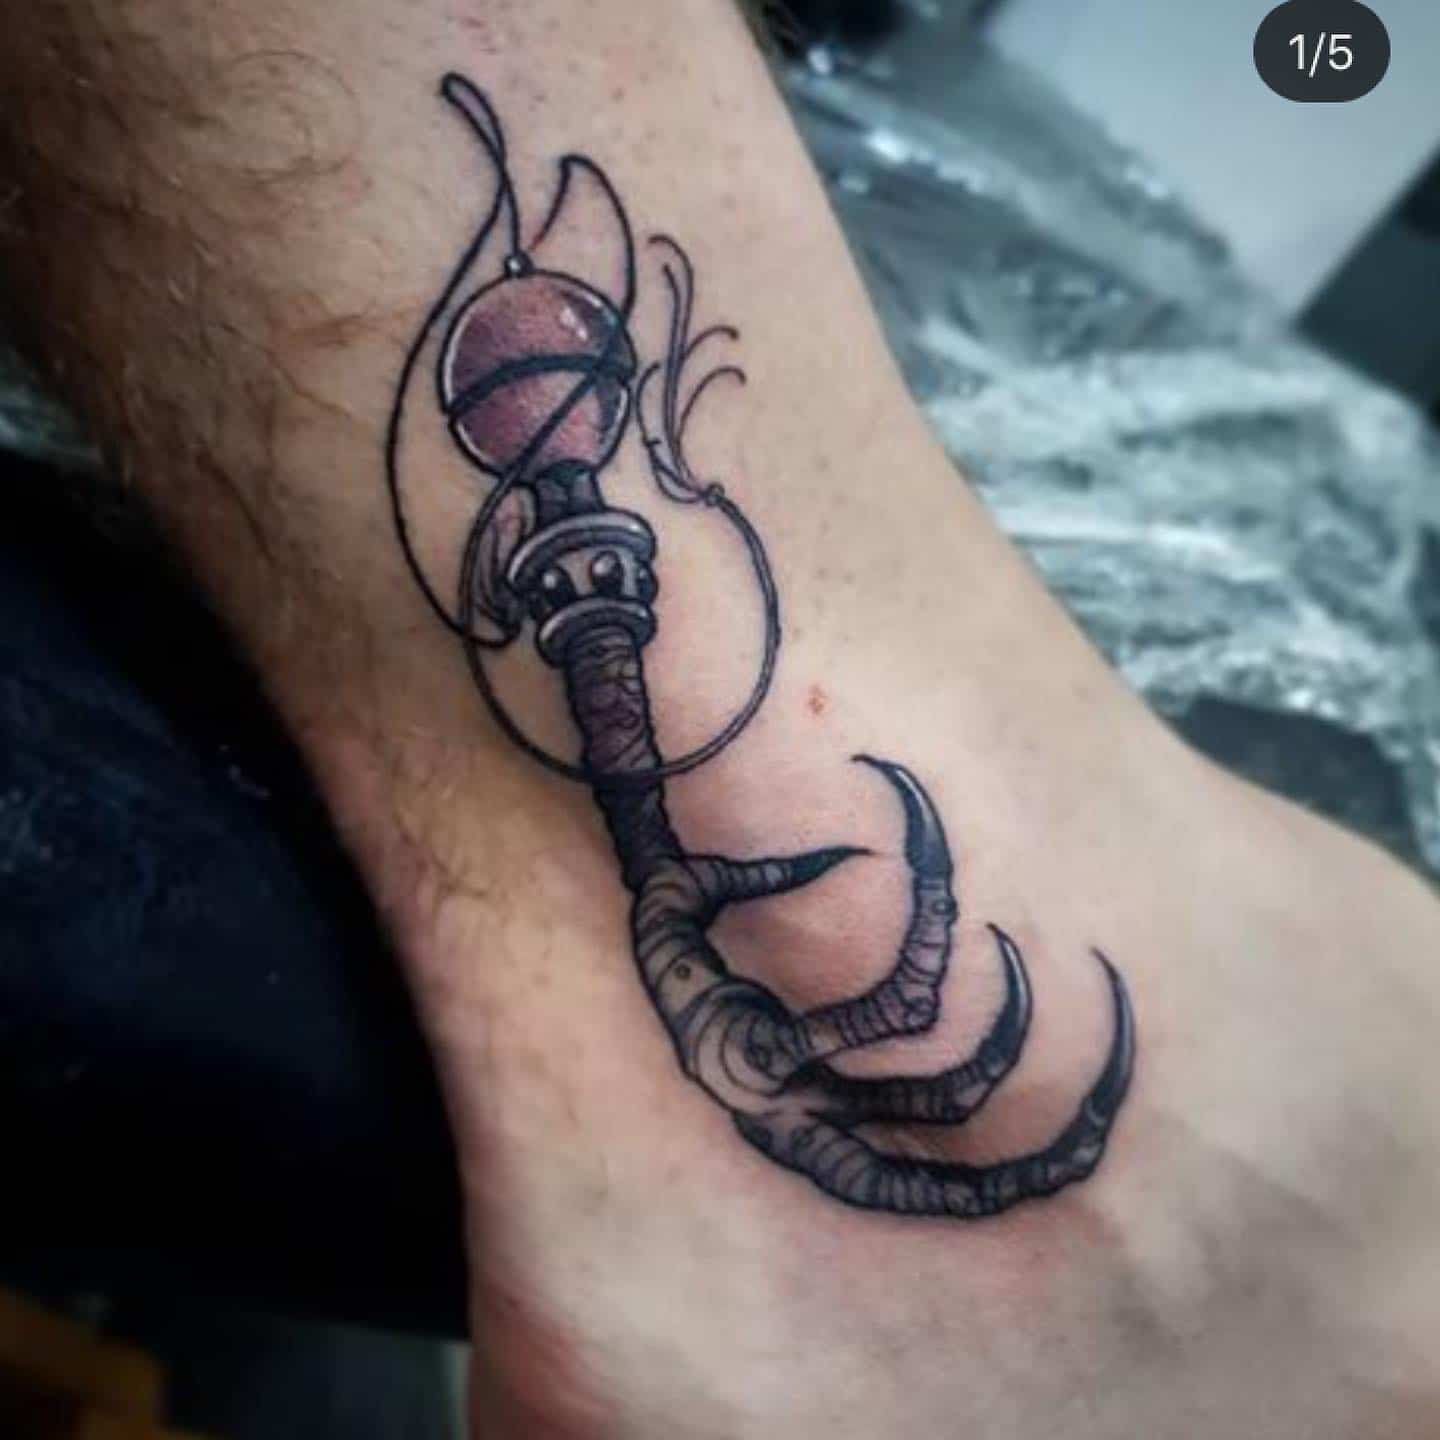 We’ve had a whopping full day cancellation with our Bolton Babe @usedntattooed this Wednesday! Come start an epic piece or get some cool small pieces 
.
.
.
black white tattoo blackandgreytattoo realism bandgreytattoo tats tat realistic art artistic studioxiii instatattoos tattoosuppliesuk tattoo_artwork inkd inkdup uktta